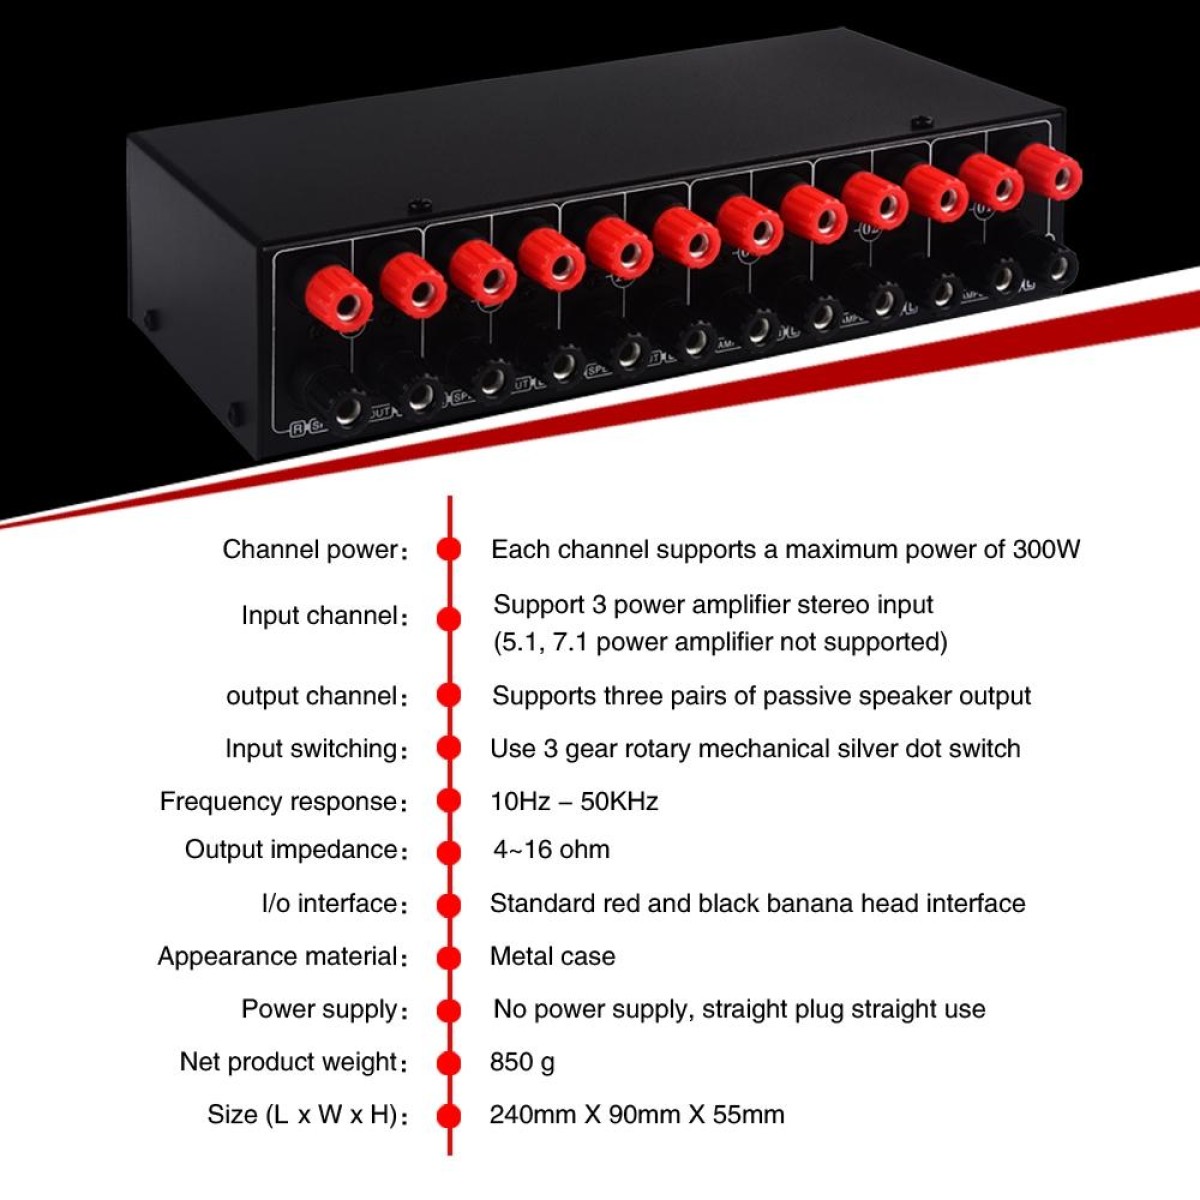 B037 3 Input 3 Output Power Amplifier And Speaker Switcher Speaker Switch Splitter Comparator 300W Per Channel Without Loss Of Sound Quality